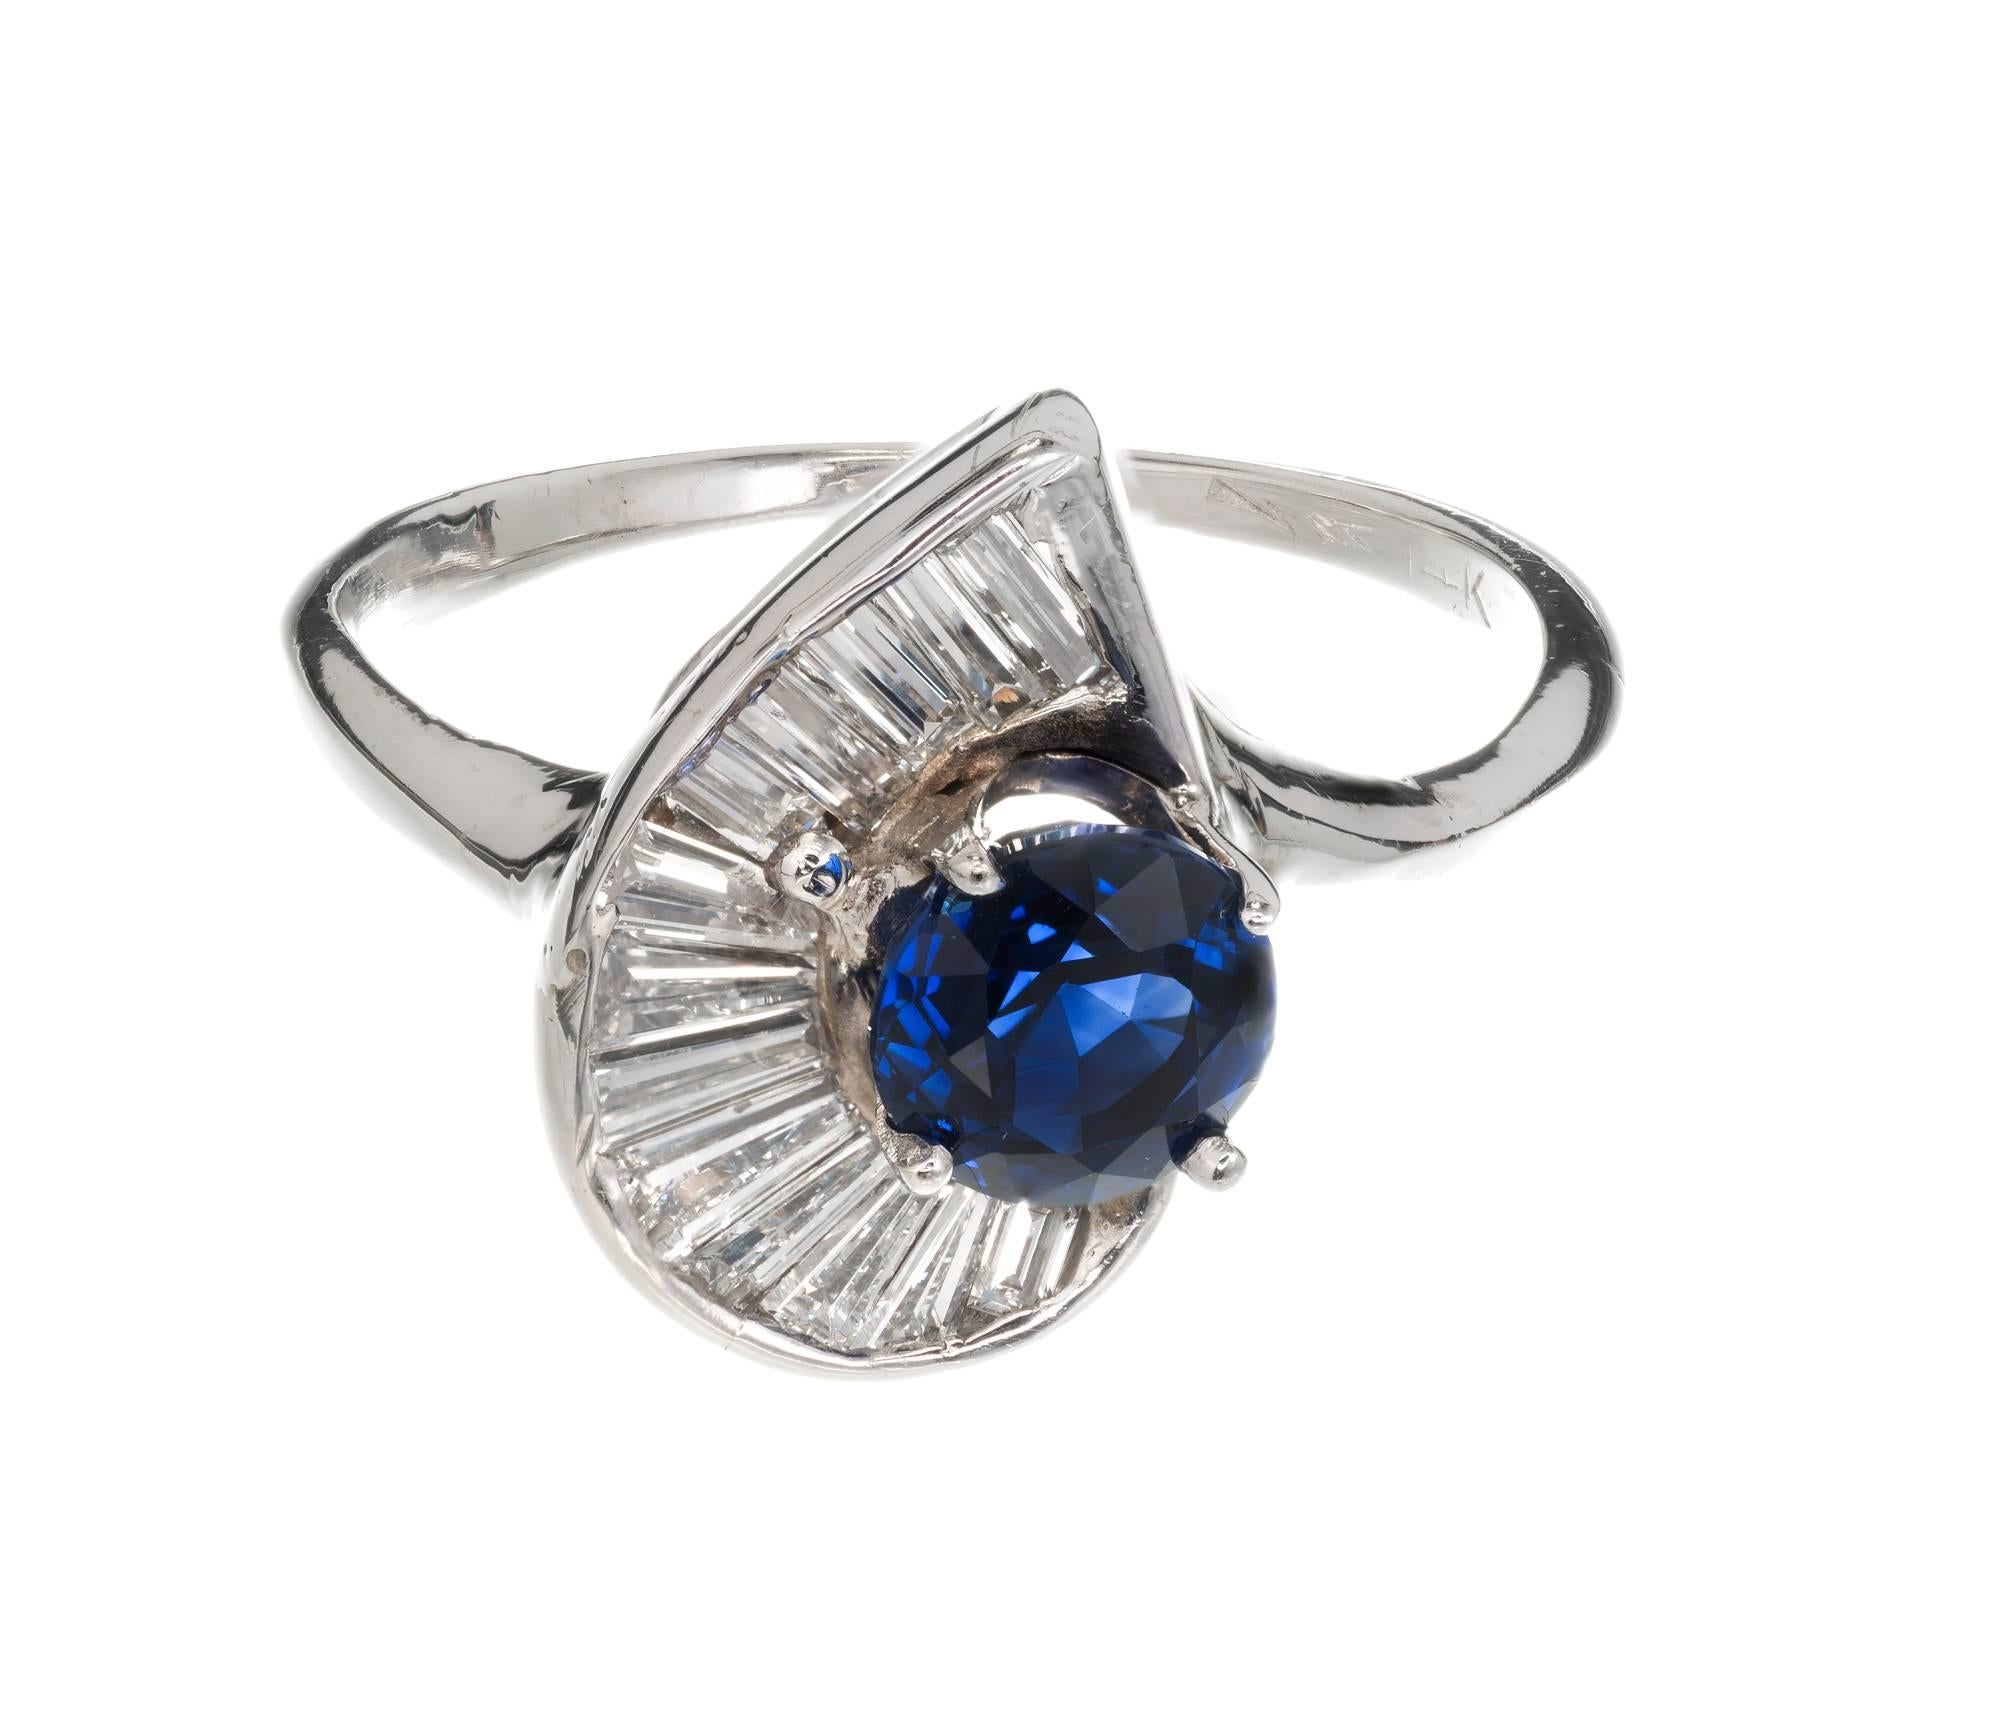 Vintage mid-century 1950s natural no heat blue Sapphire and Baguette Diamond swirl ring. 14k white gold setting.

1 round blue Sapphire, approx. total weight .98cts, no heat, GIA certificate #1182361602
13 Baguette Diamonds, approx. total weight